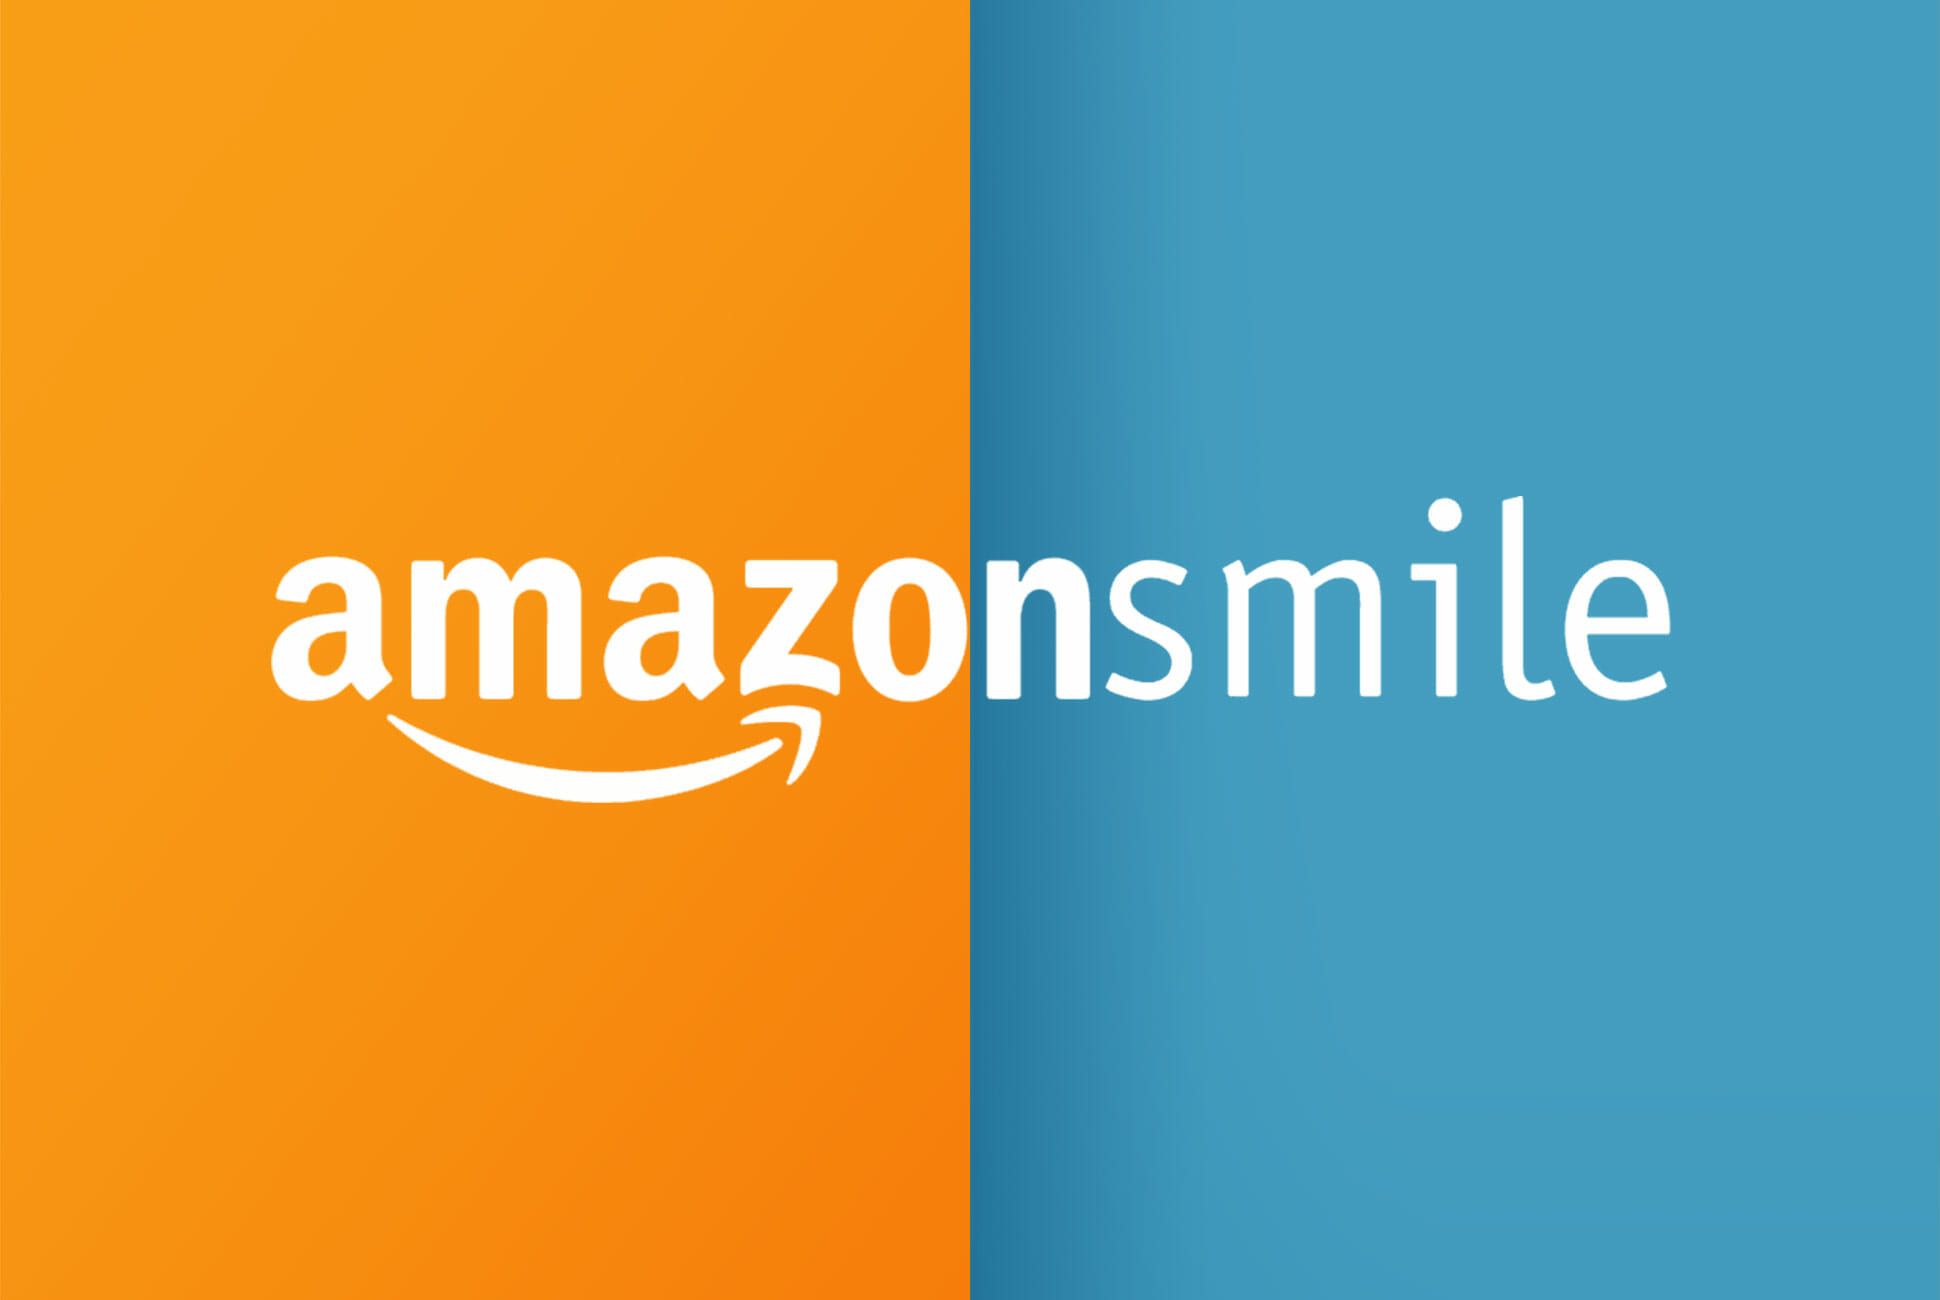 Remember You Can Donate To The Cause Of Your Choice On Prime Day Through Amazon Smile